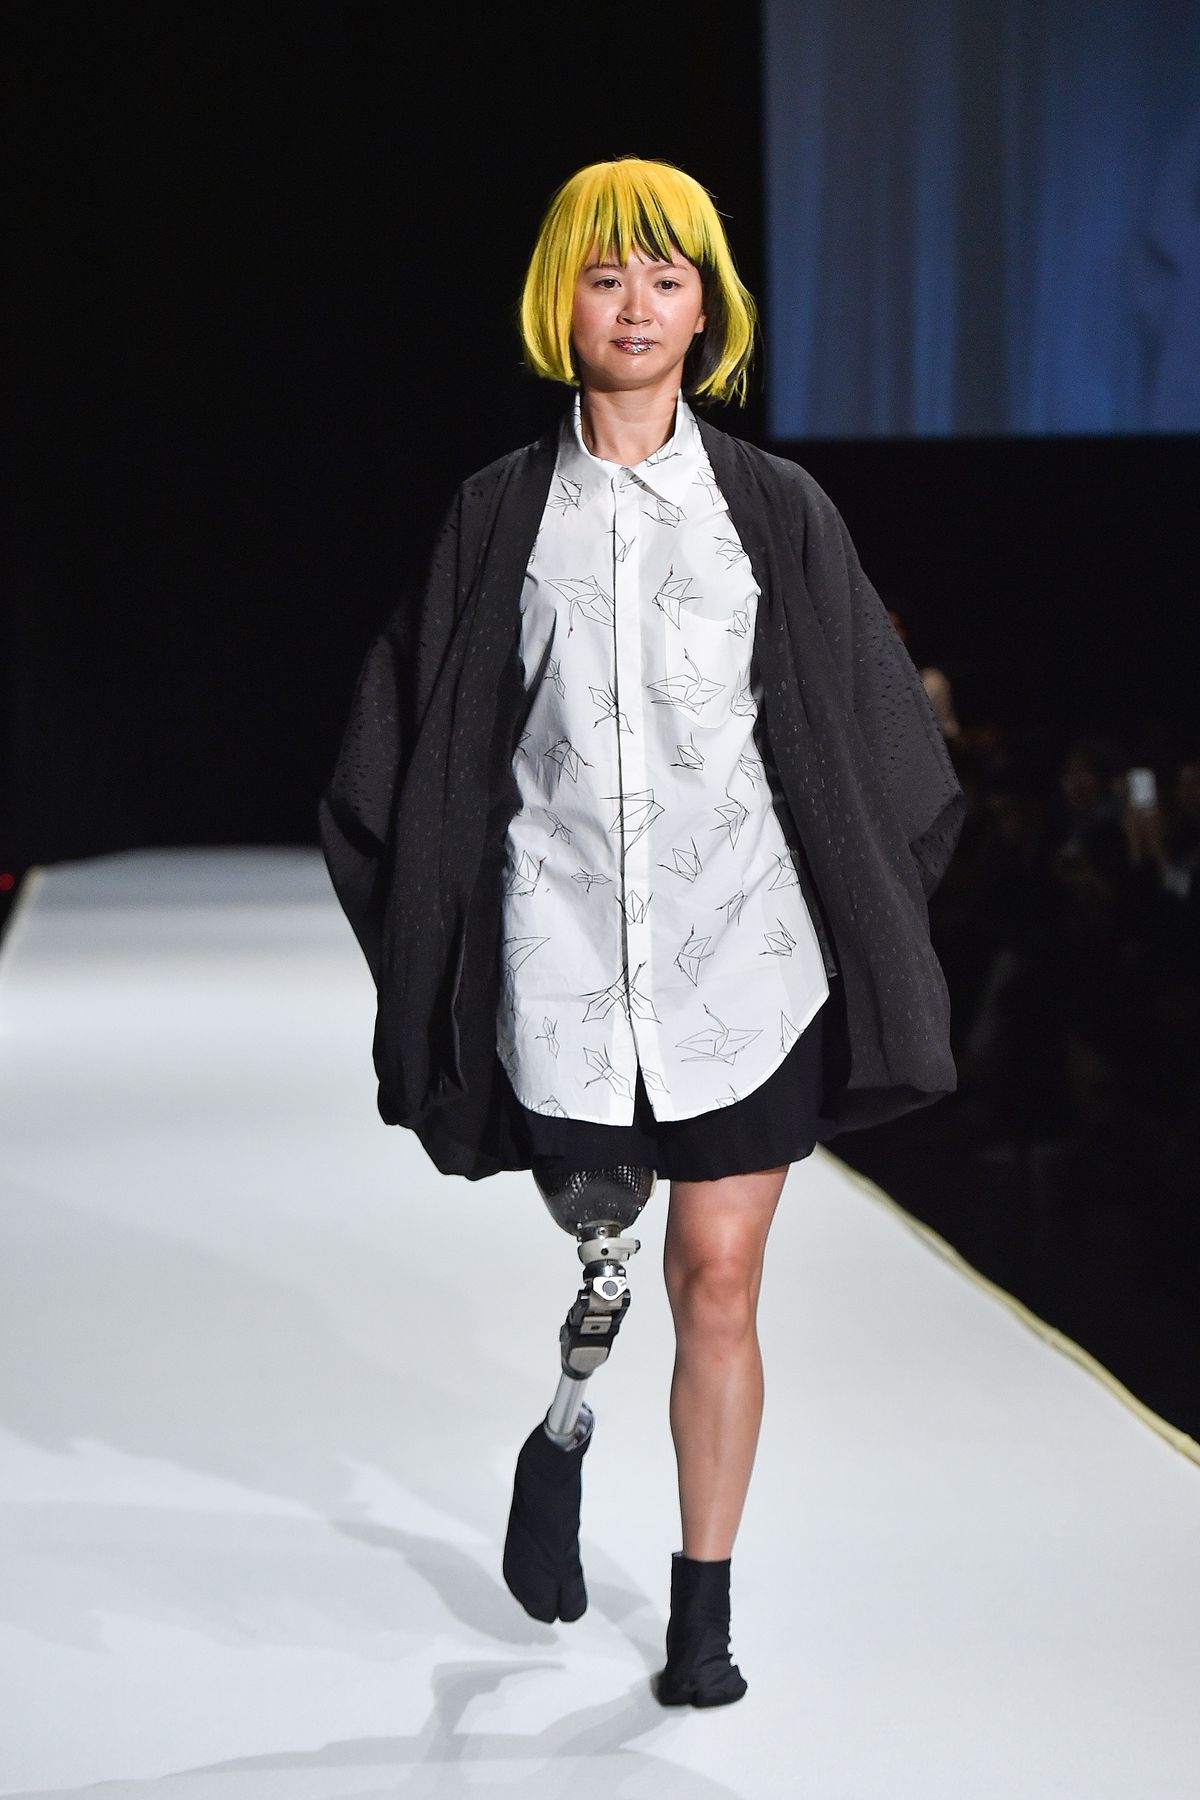 A fashion show featuring designs for people with disabilities.